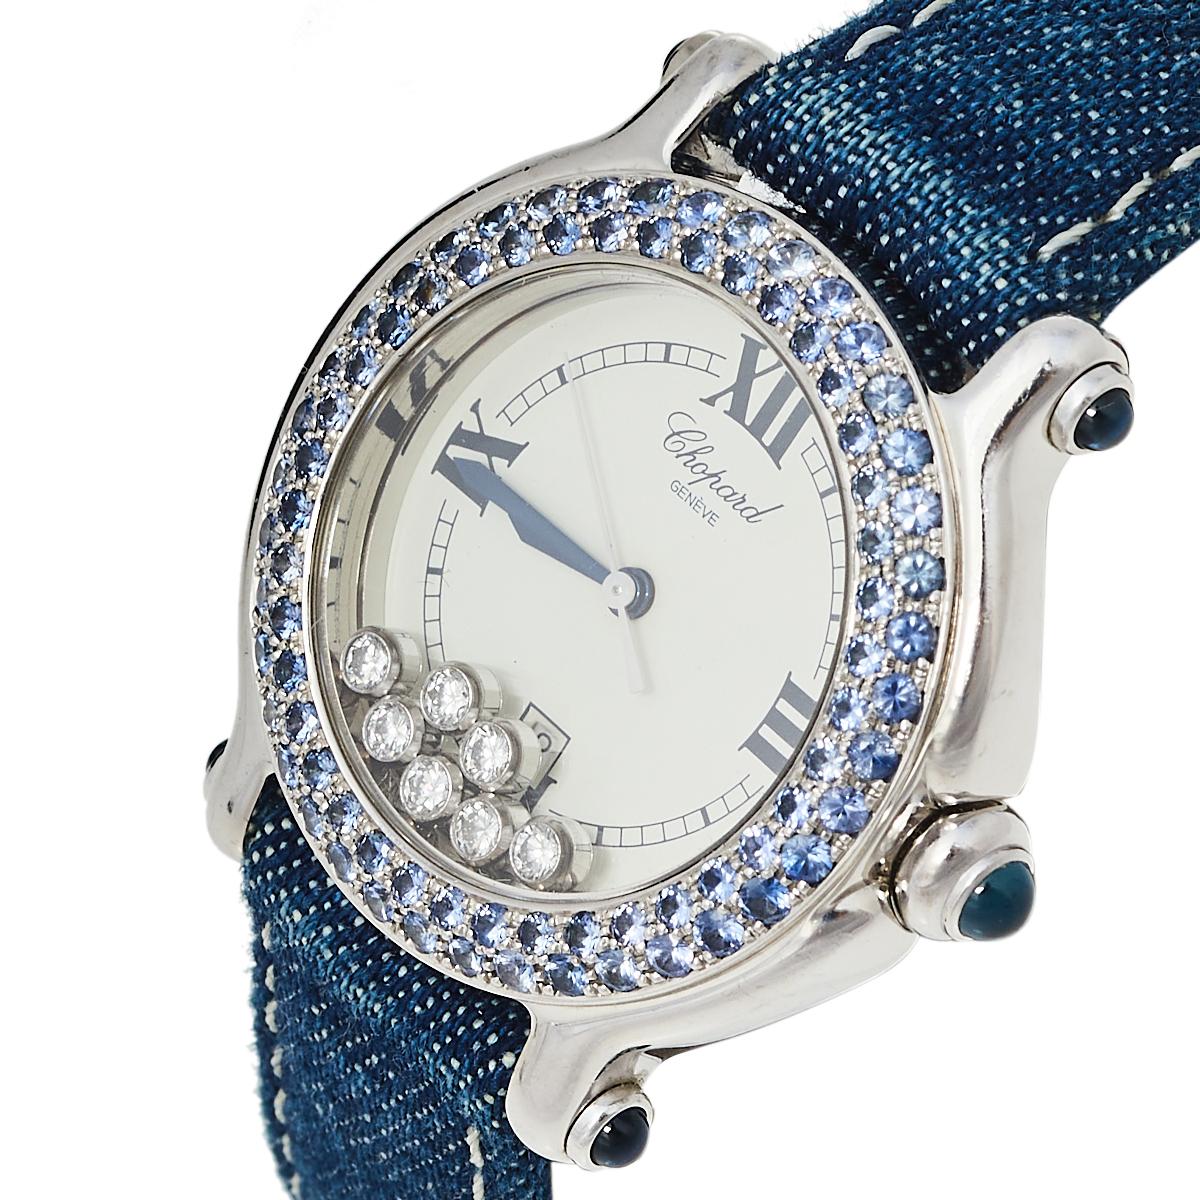 True to Chopard's spirit of perfection, this Happy Sport version was made and might we say it is stunning. One can see the harmonious fusion of function with contemporary charm in every detail, from the round case to the buckle clasp of the fabric